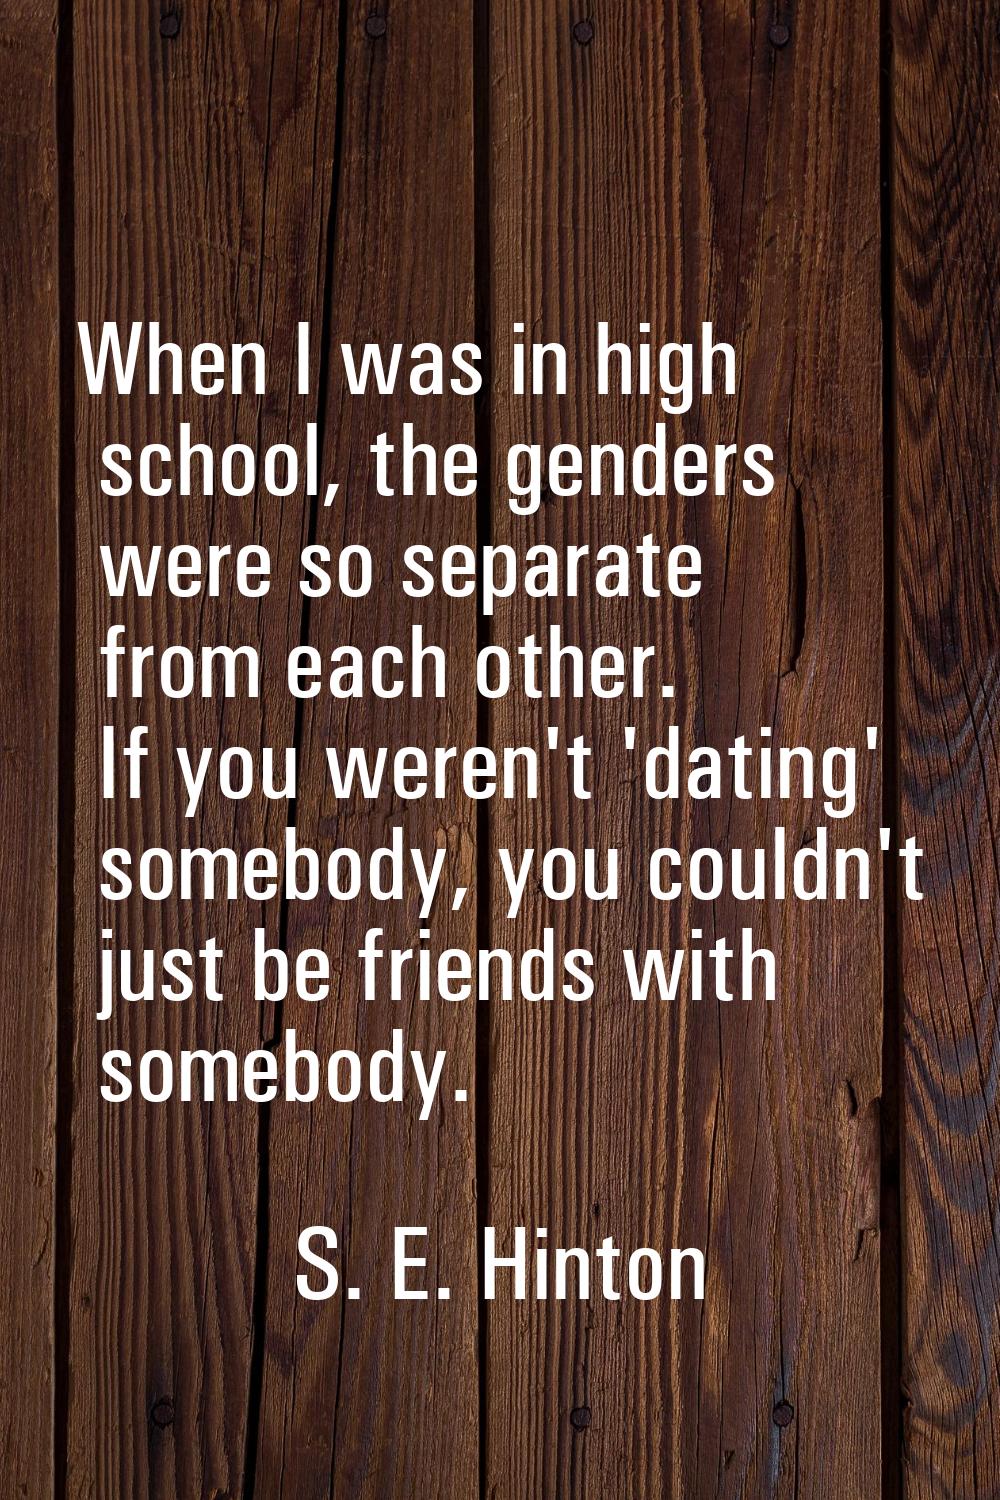 When I was in high school, the genders were so separate from each other. If you weren't 'dating' so